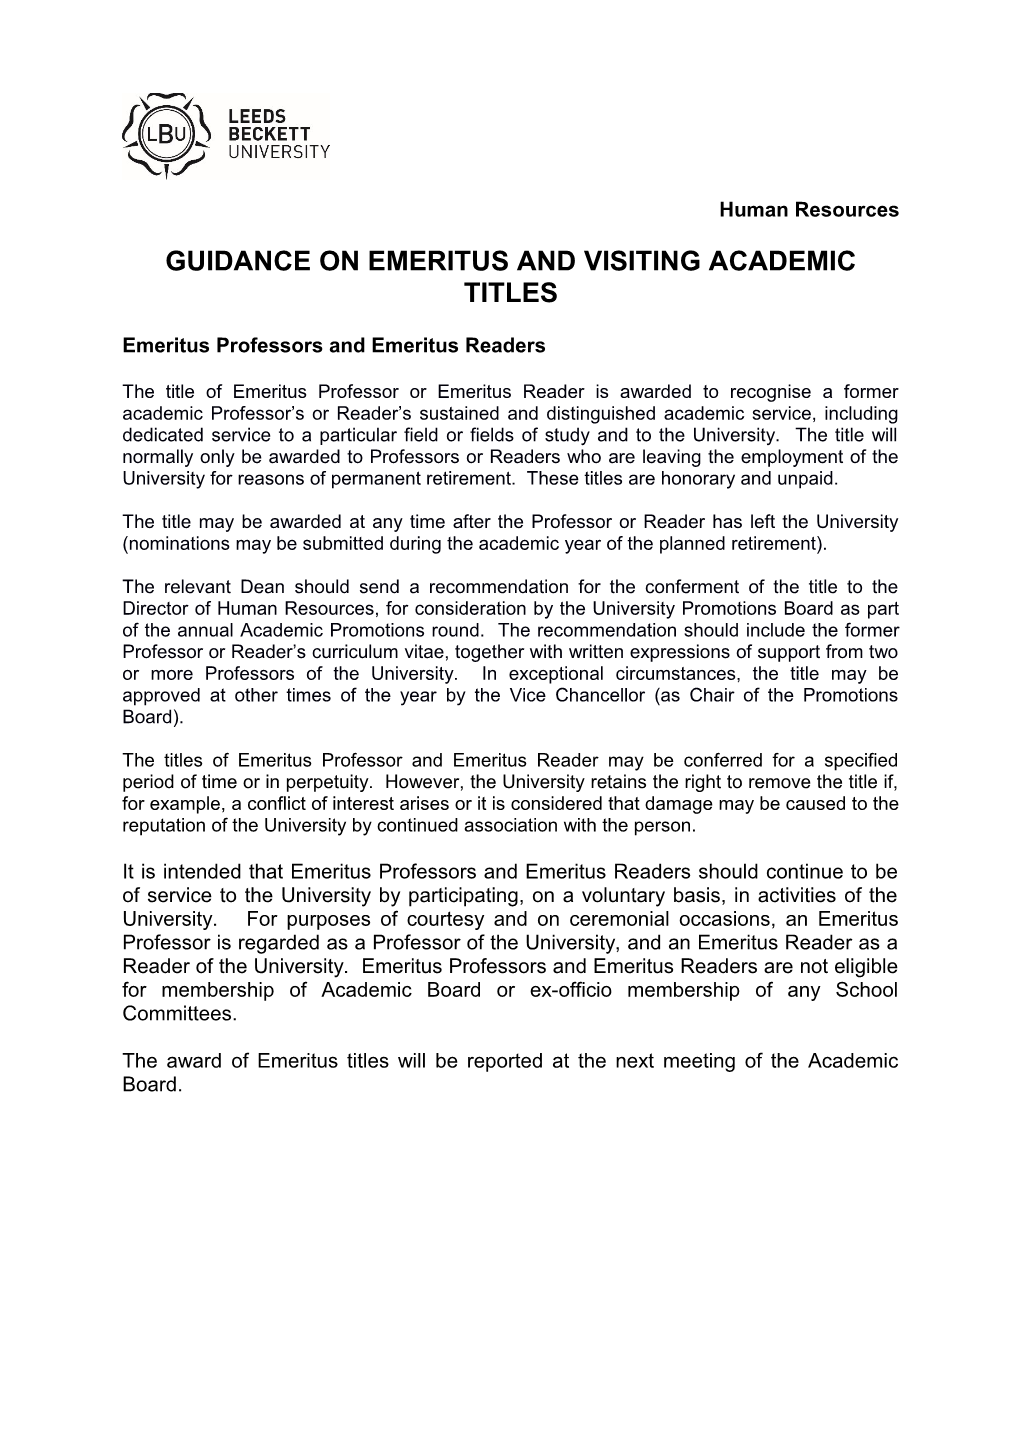 Guidance on Emeritus and Visiting Academic Titles